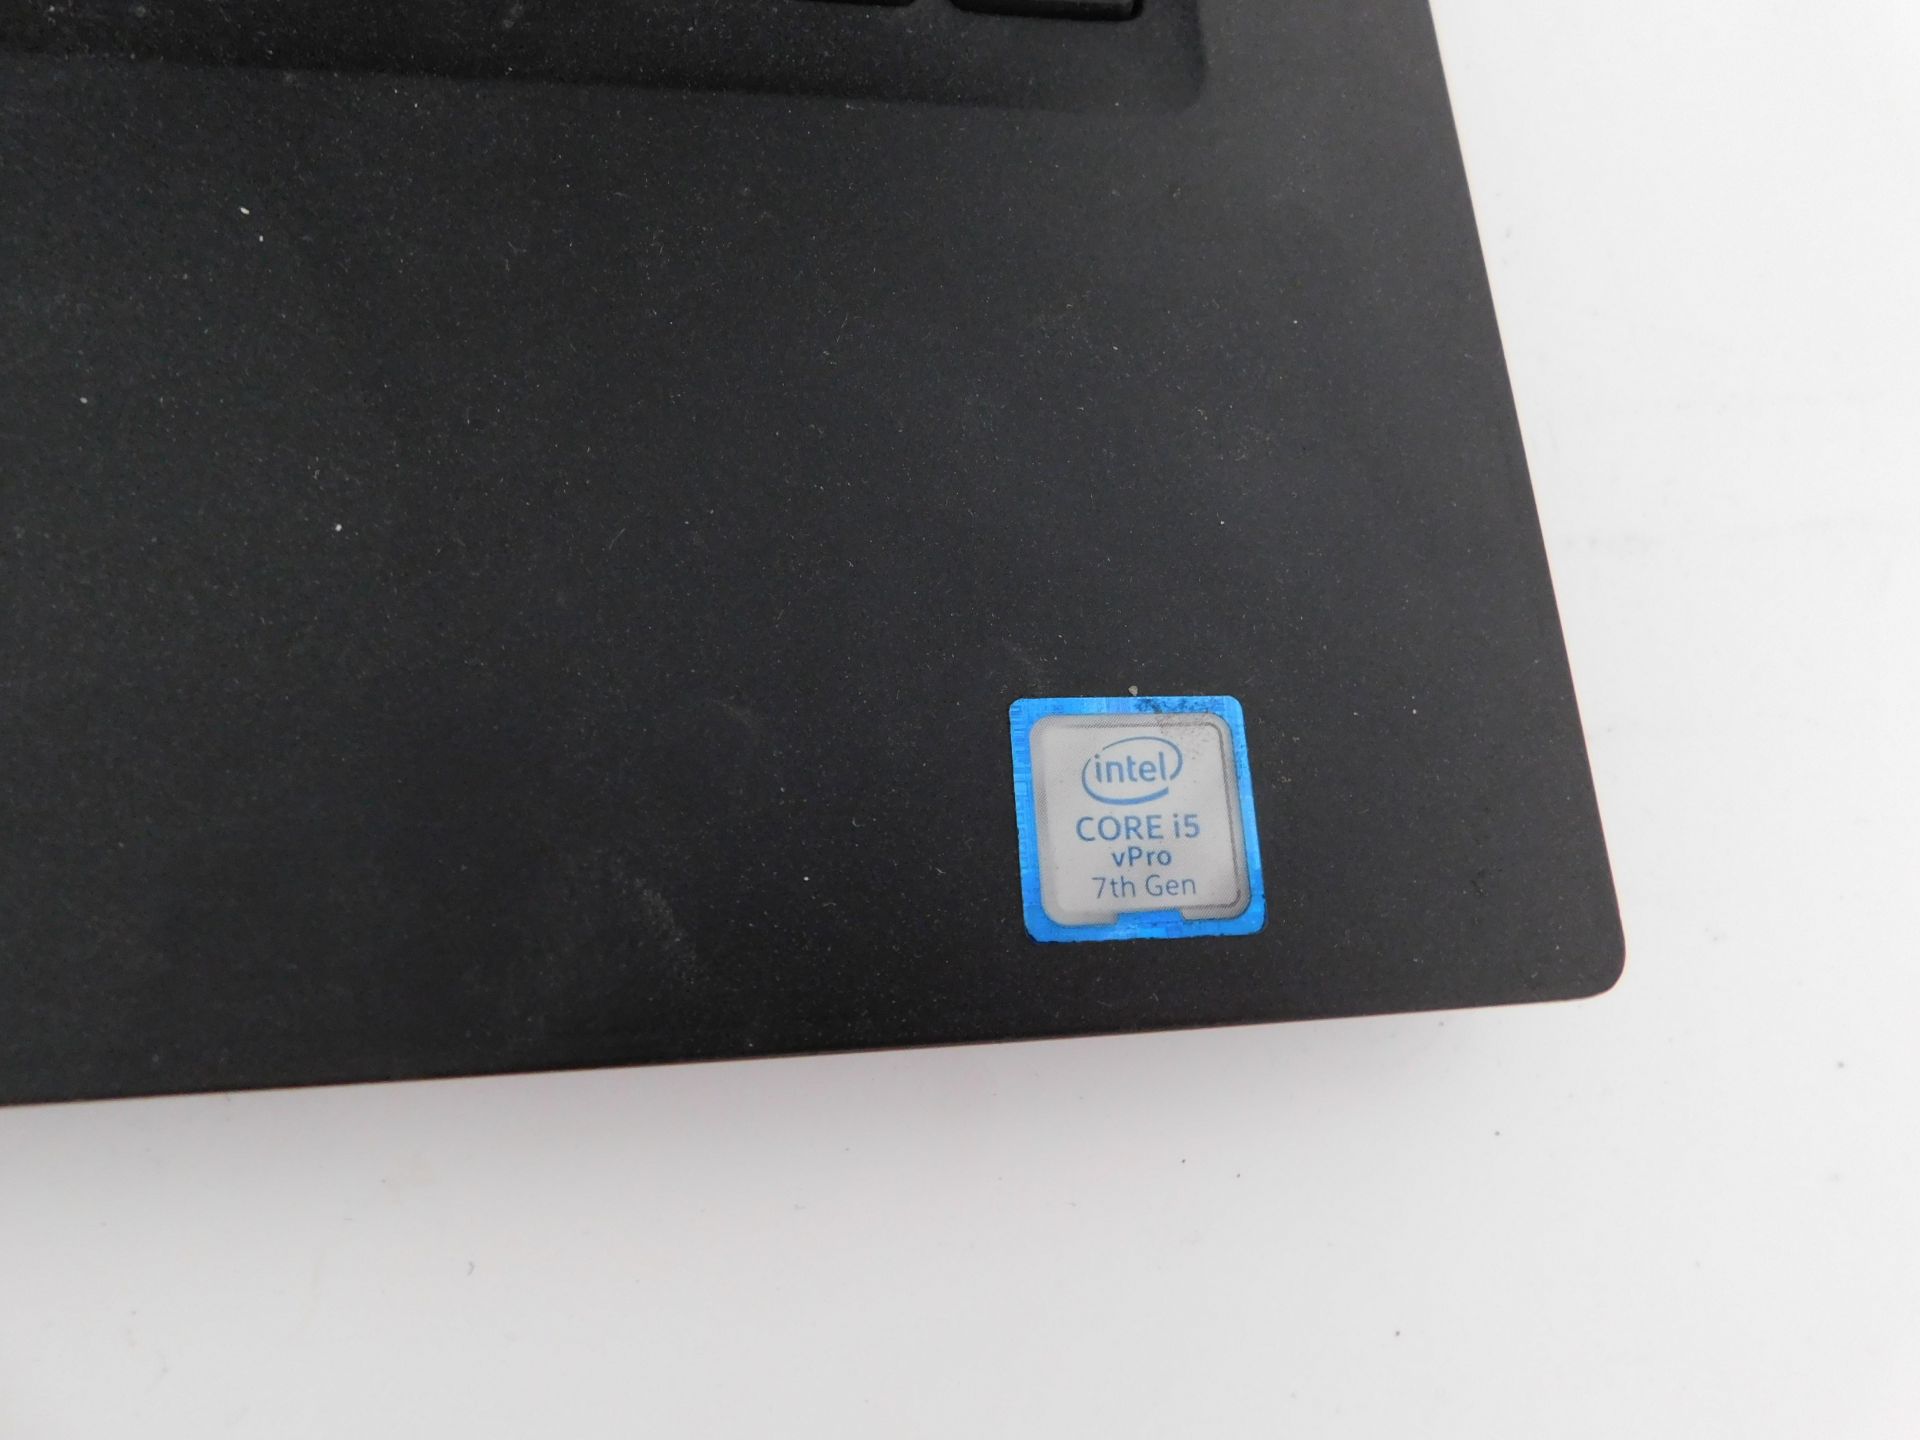 Dell Latitude 7480 Laptop, i5, No PSU (No HDD) (Location Stockport. Please Refer to General Notes) - Image 2 of 3